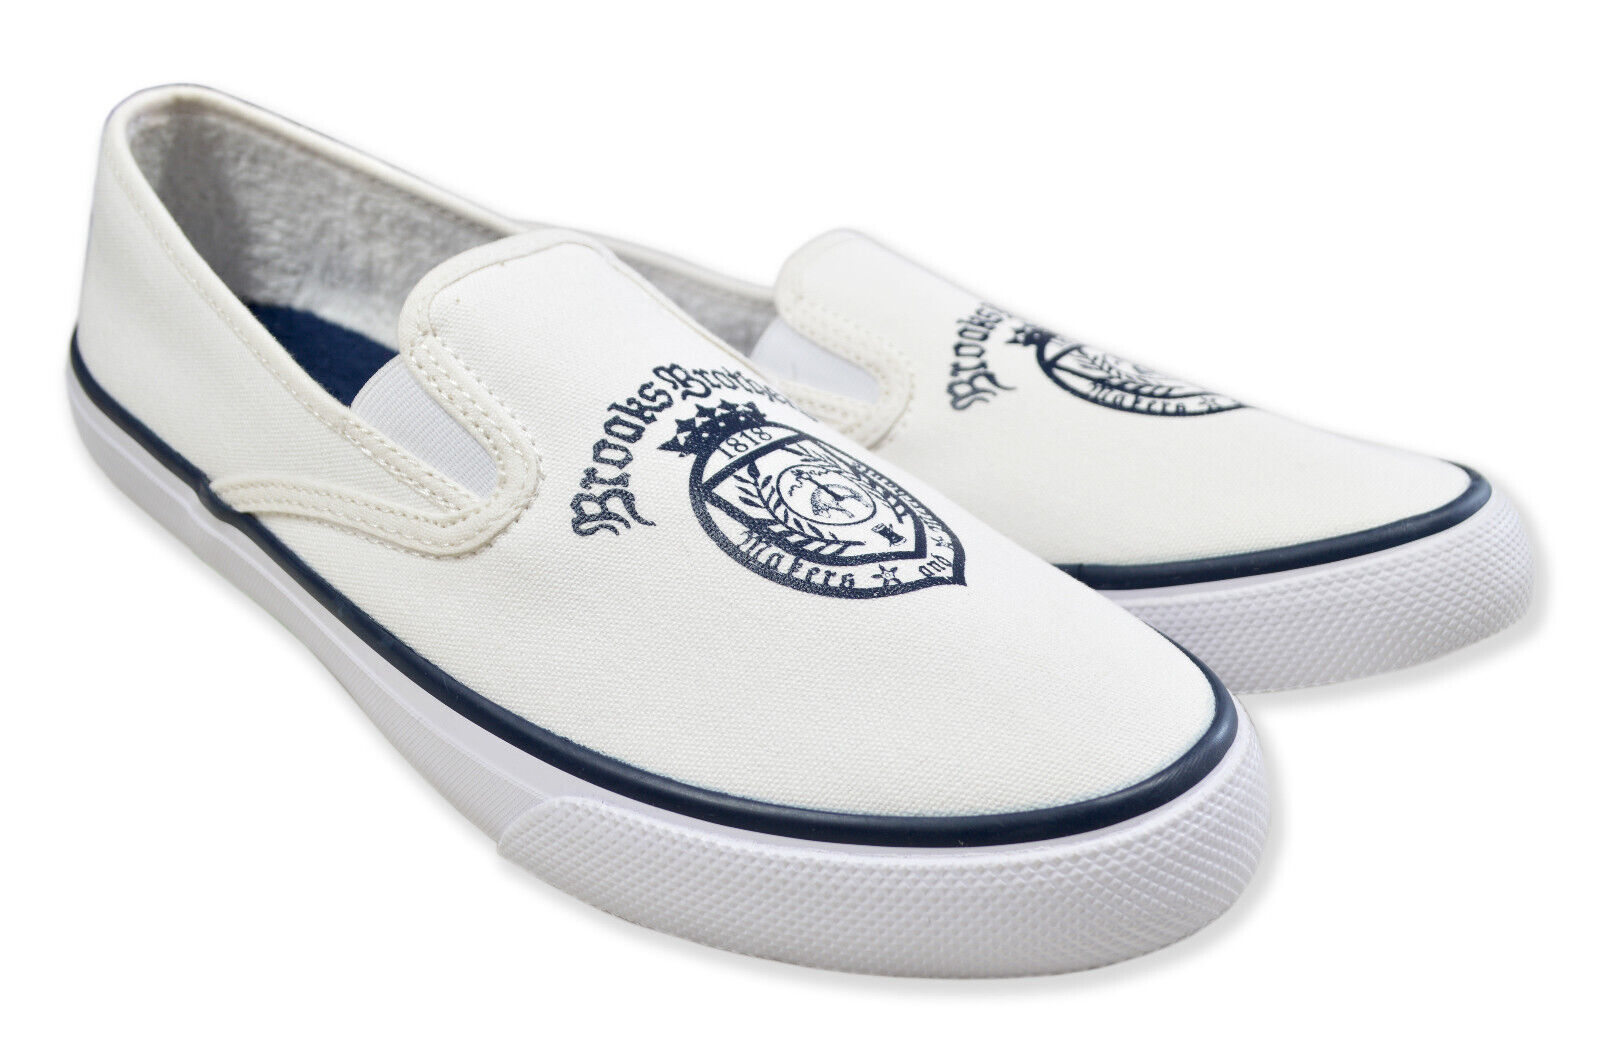 Primary image for Brooks Brothers Sperry White & Navy Crest Canvas Slip On Sneakers, 10.5 M 8415-9